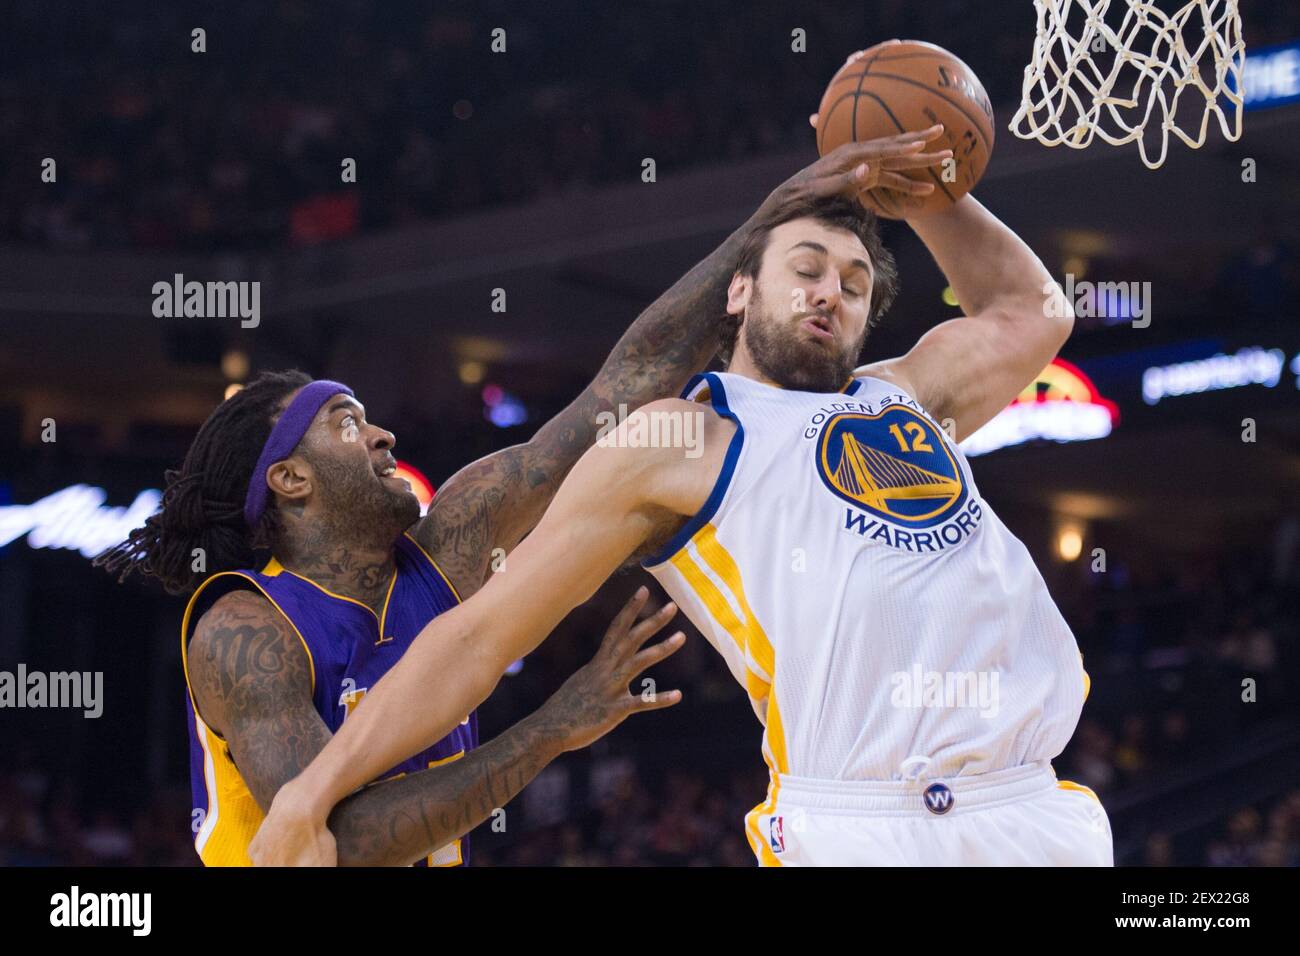 March 16, 2015; Oakland, CA, USA; Golden State Warriors center Andrew Bogut  (12) grabs a rebound against Los Angeles Lakers center Jordan Hill (27)  during the second quarter at Oracle Arena. Mandatory